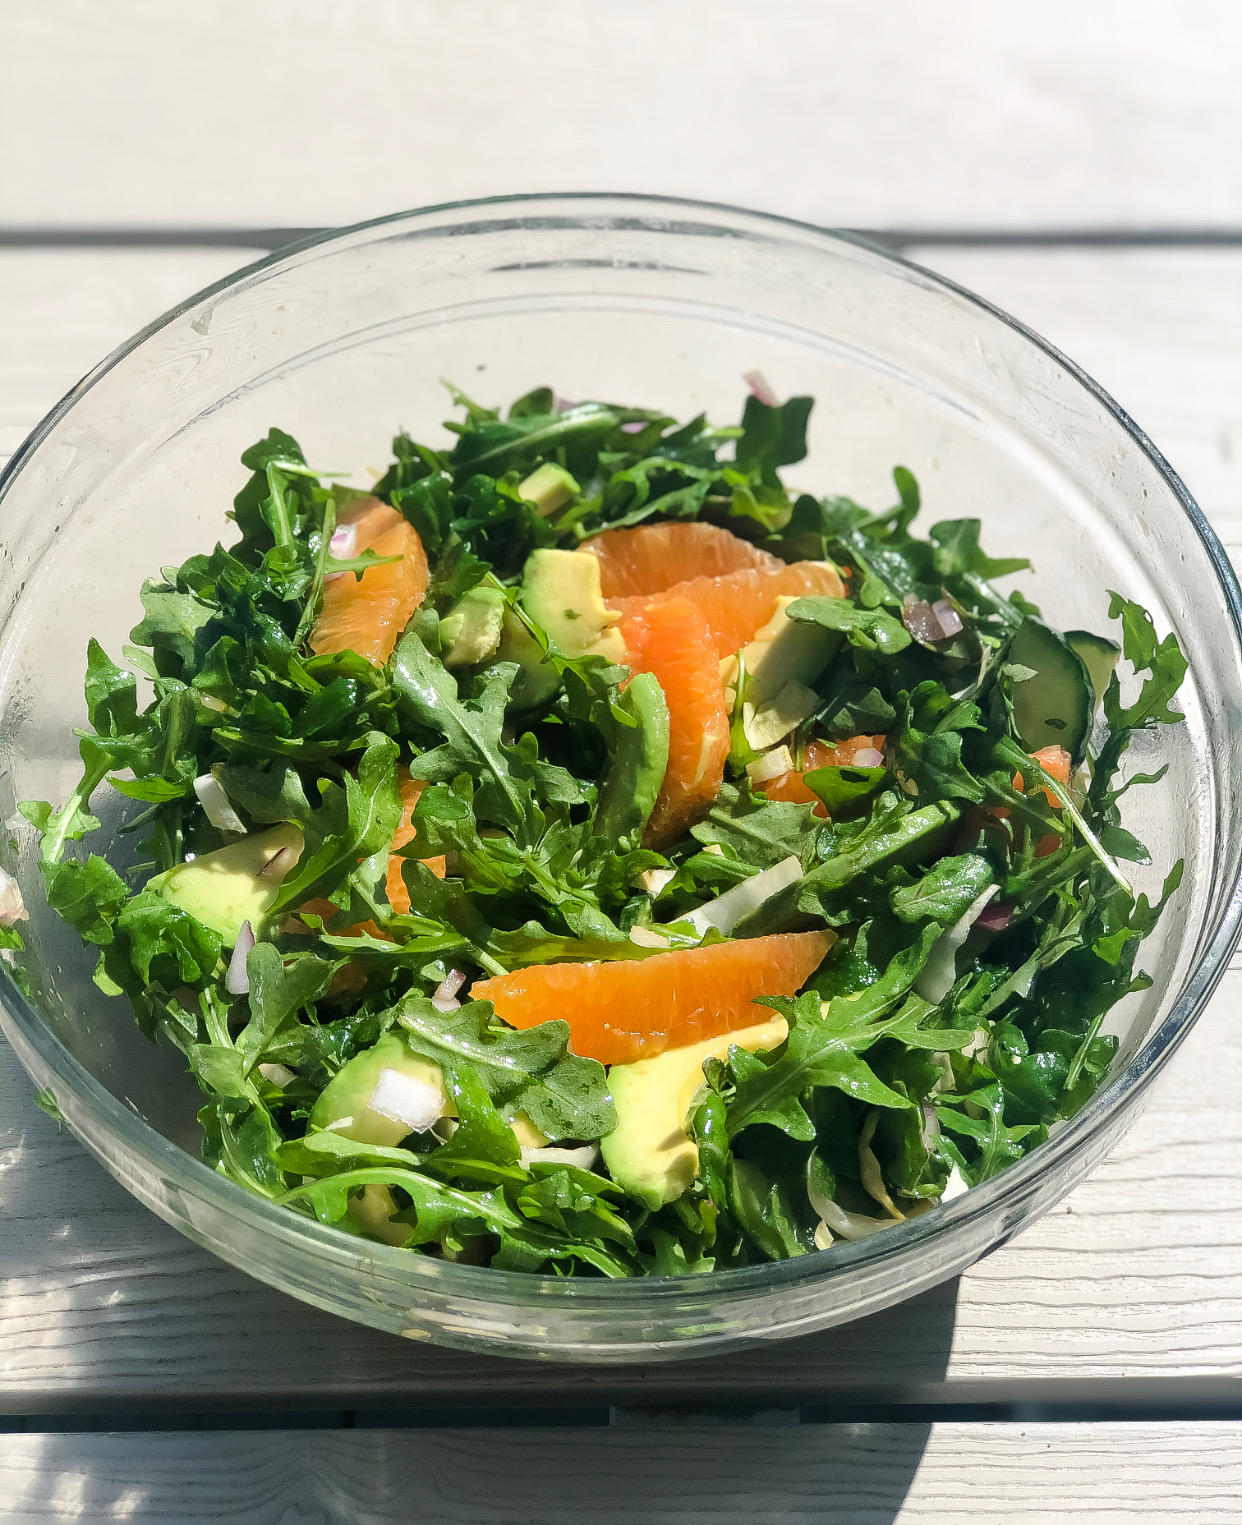 The finished arugula side salad with citrus and balsamic vinaigrette